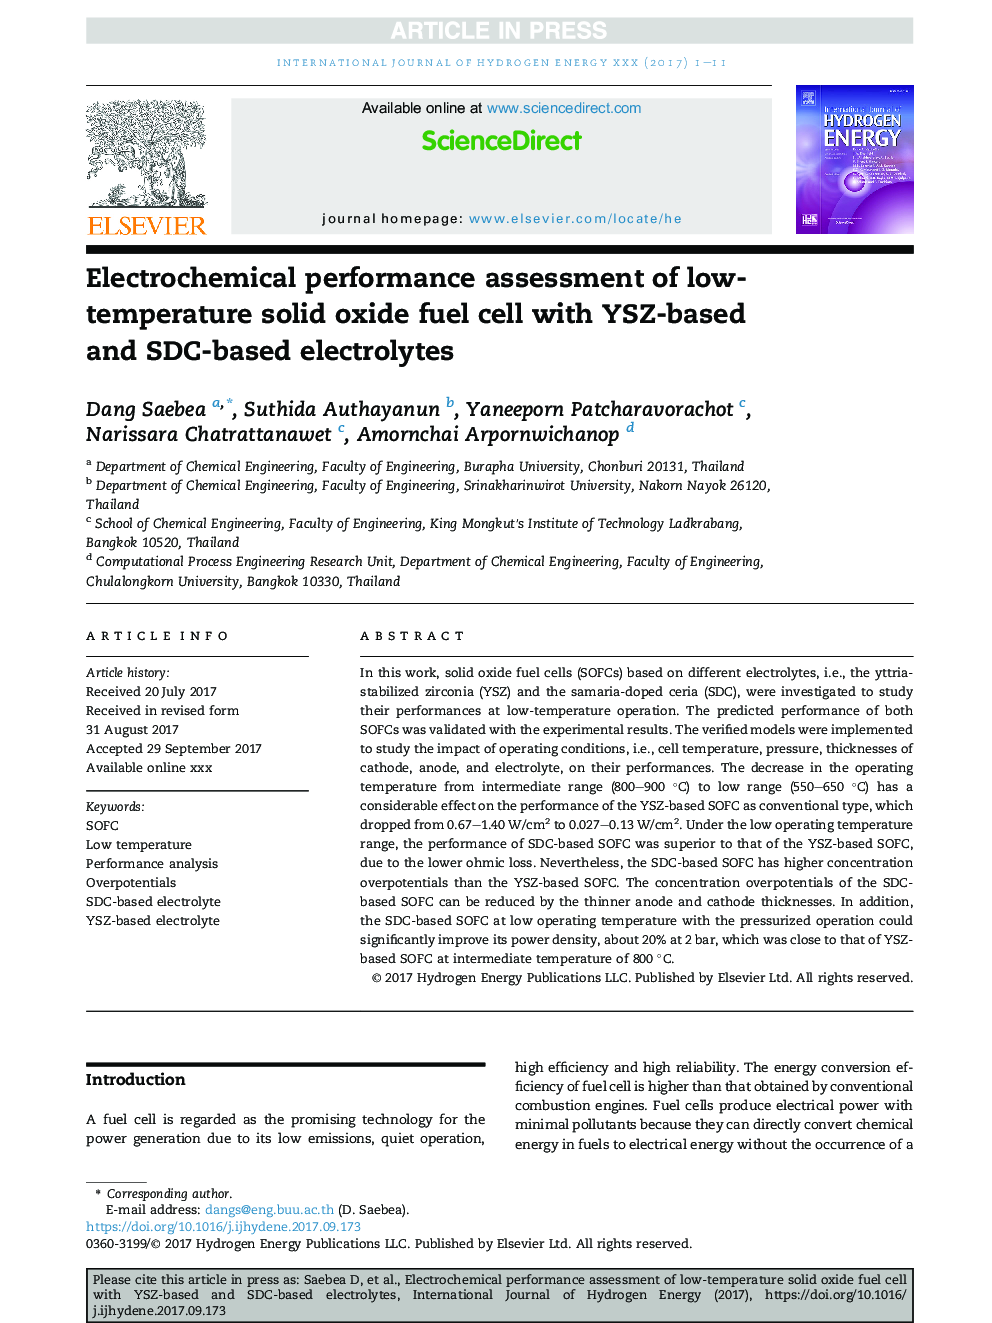 Electrochemical performance assessment of low-temperature solid oxide fuel cell with YSZ-based and SDC-based electrolytes